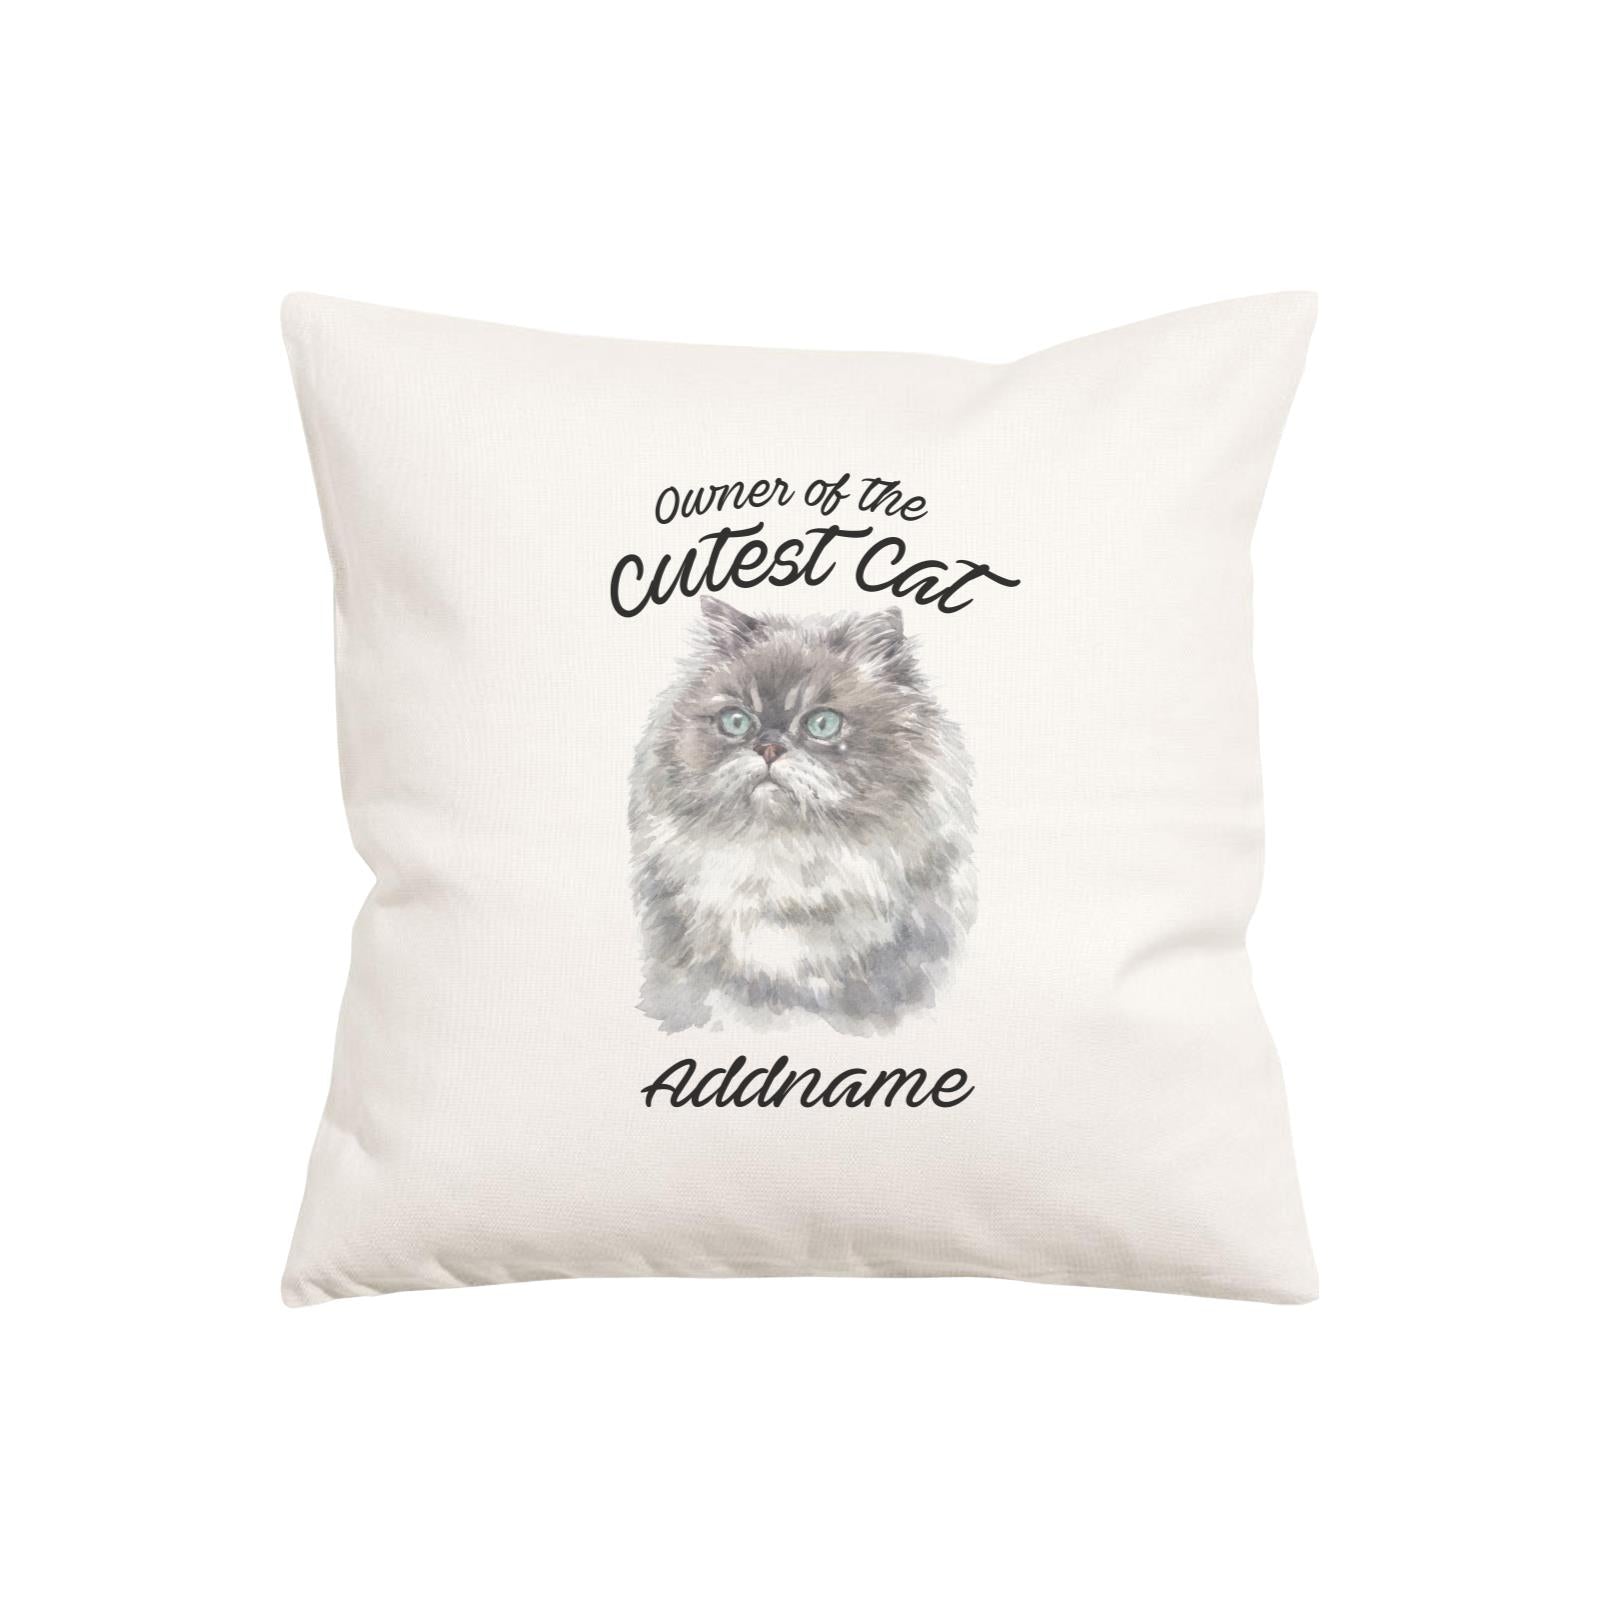 Watercolor Owner Of The Cutest Cat Himalayan Addname Pillow Cushion